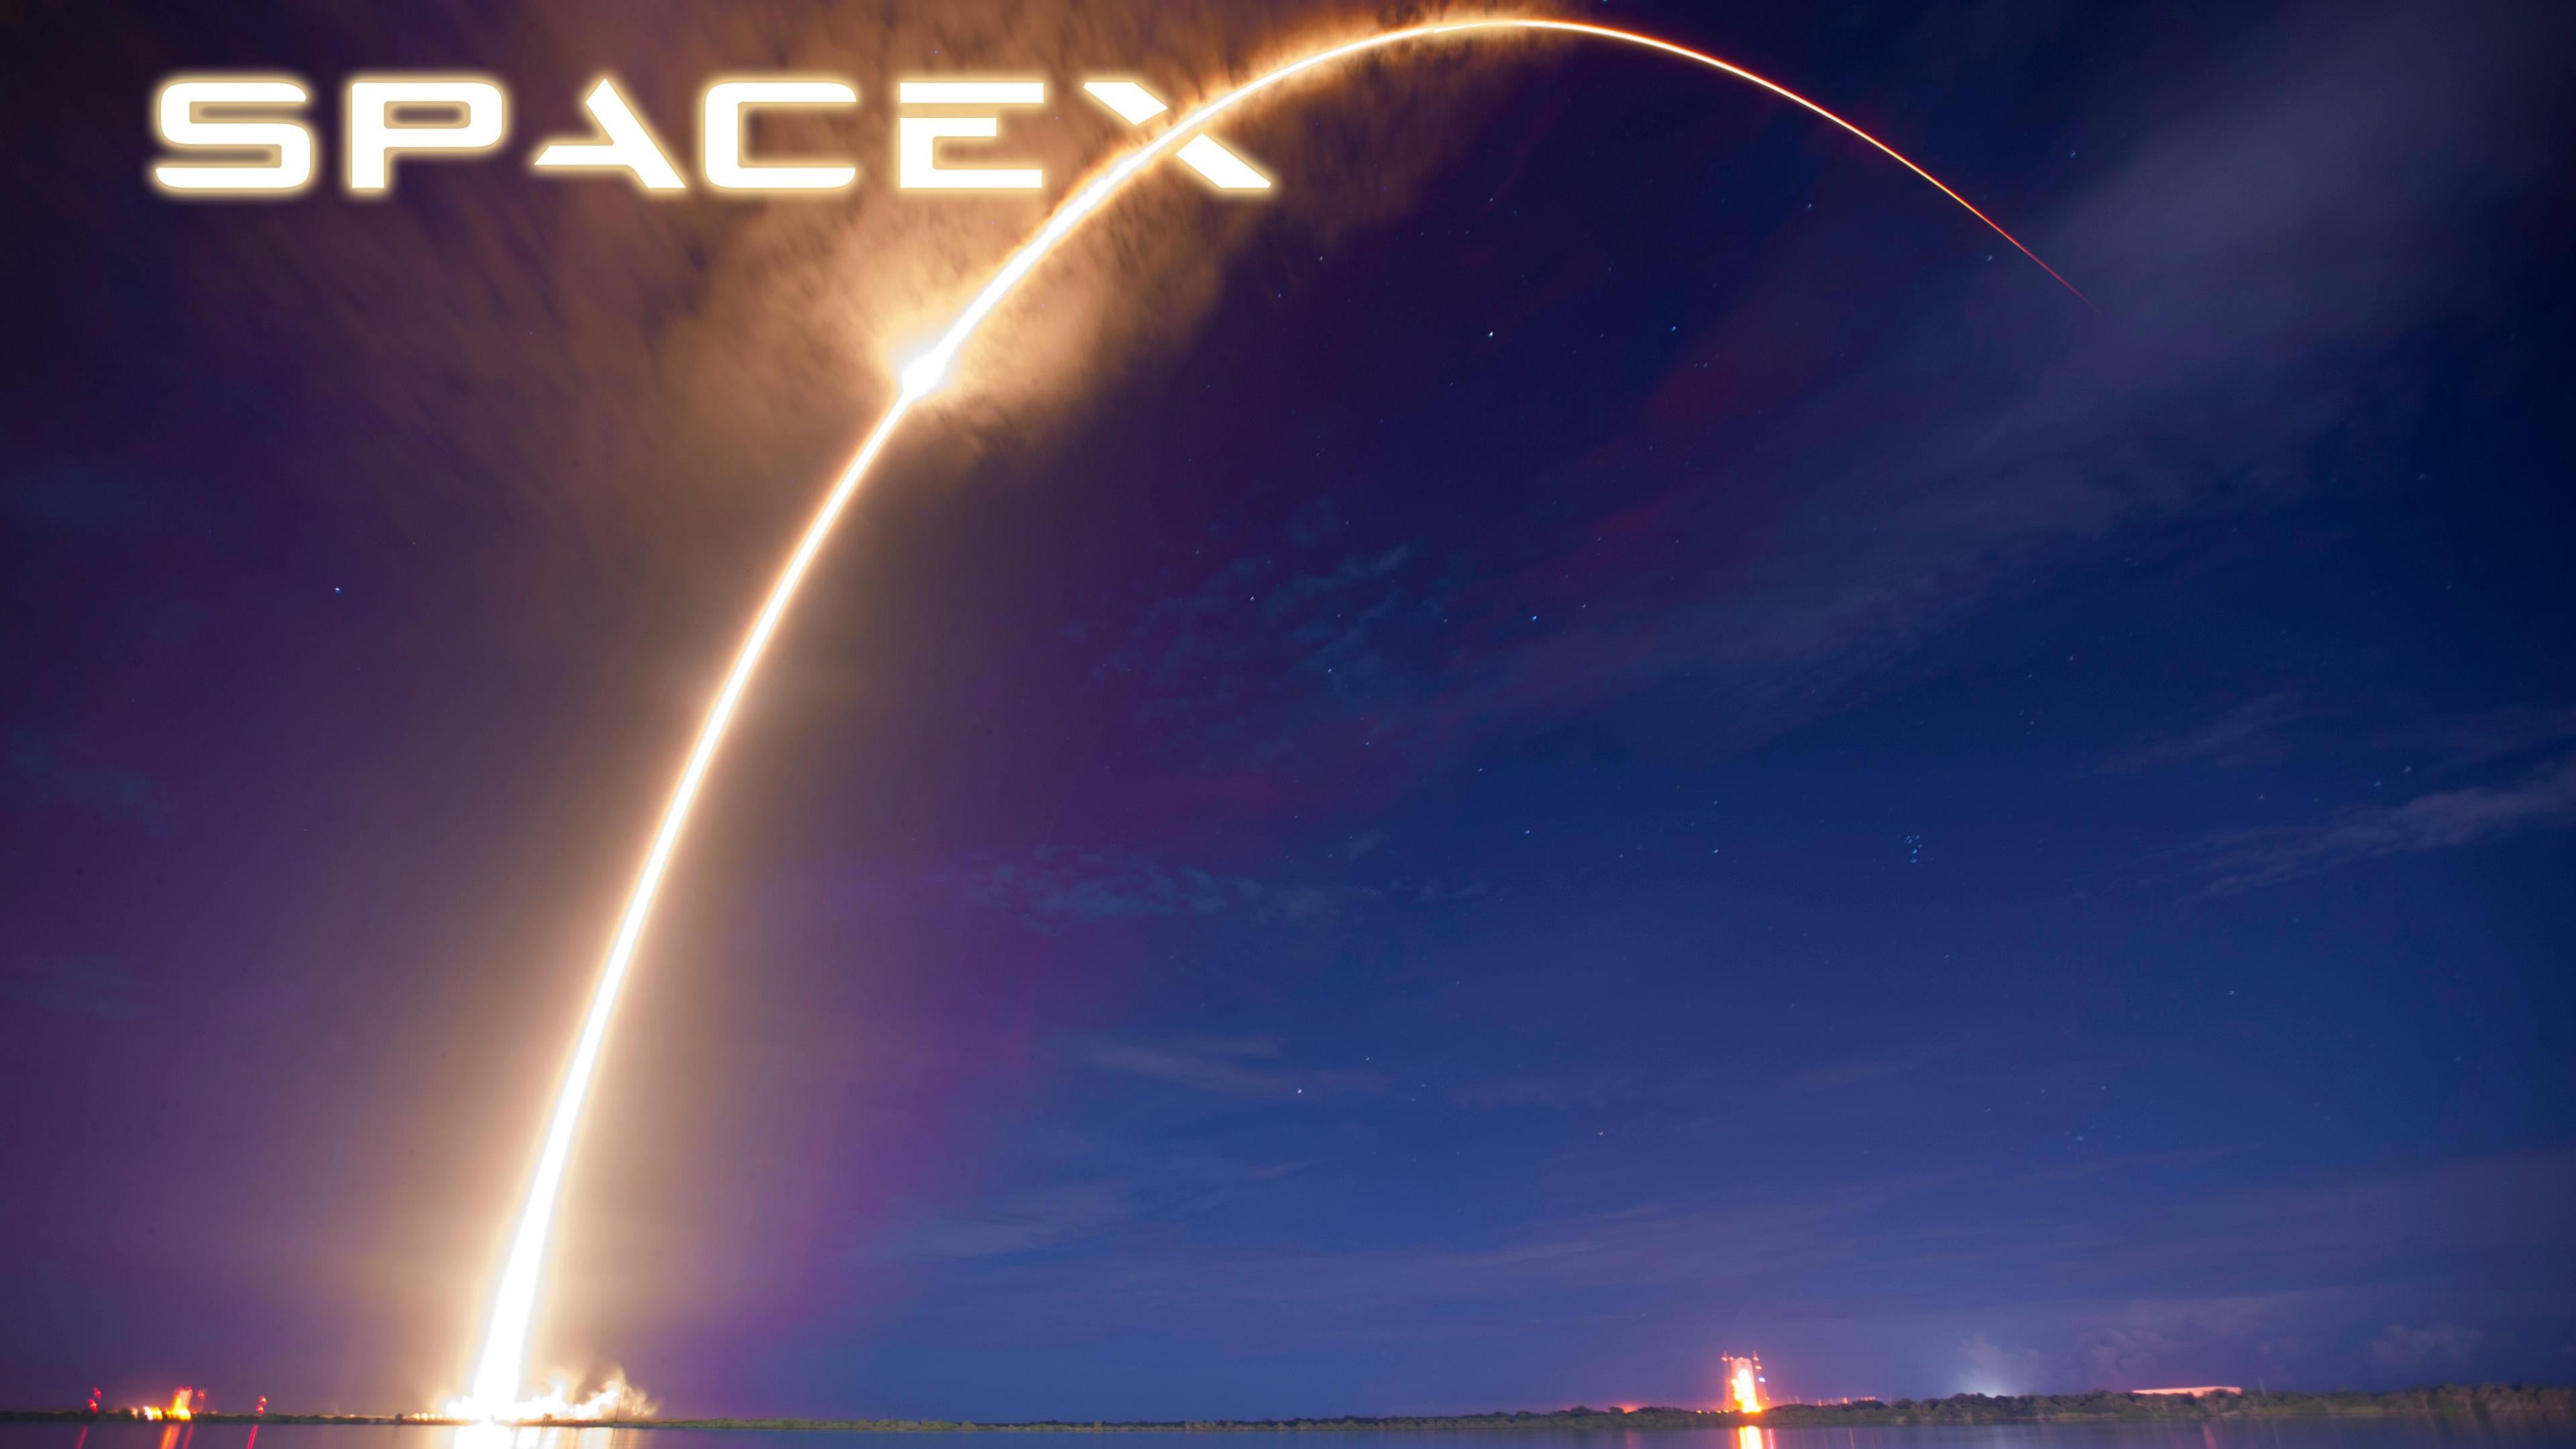 SpaceX wallpaper